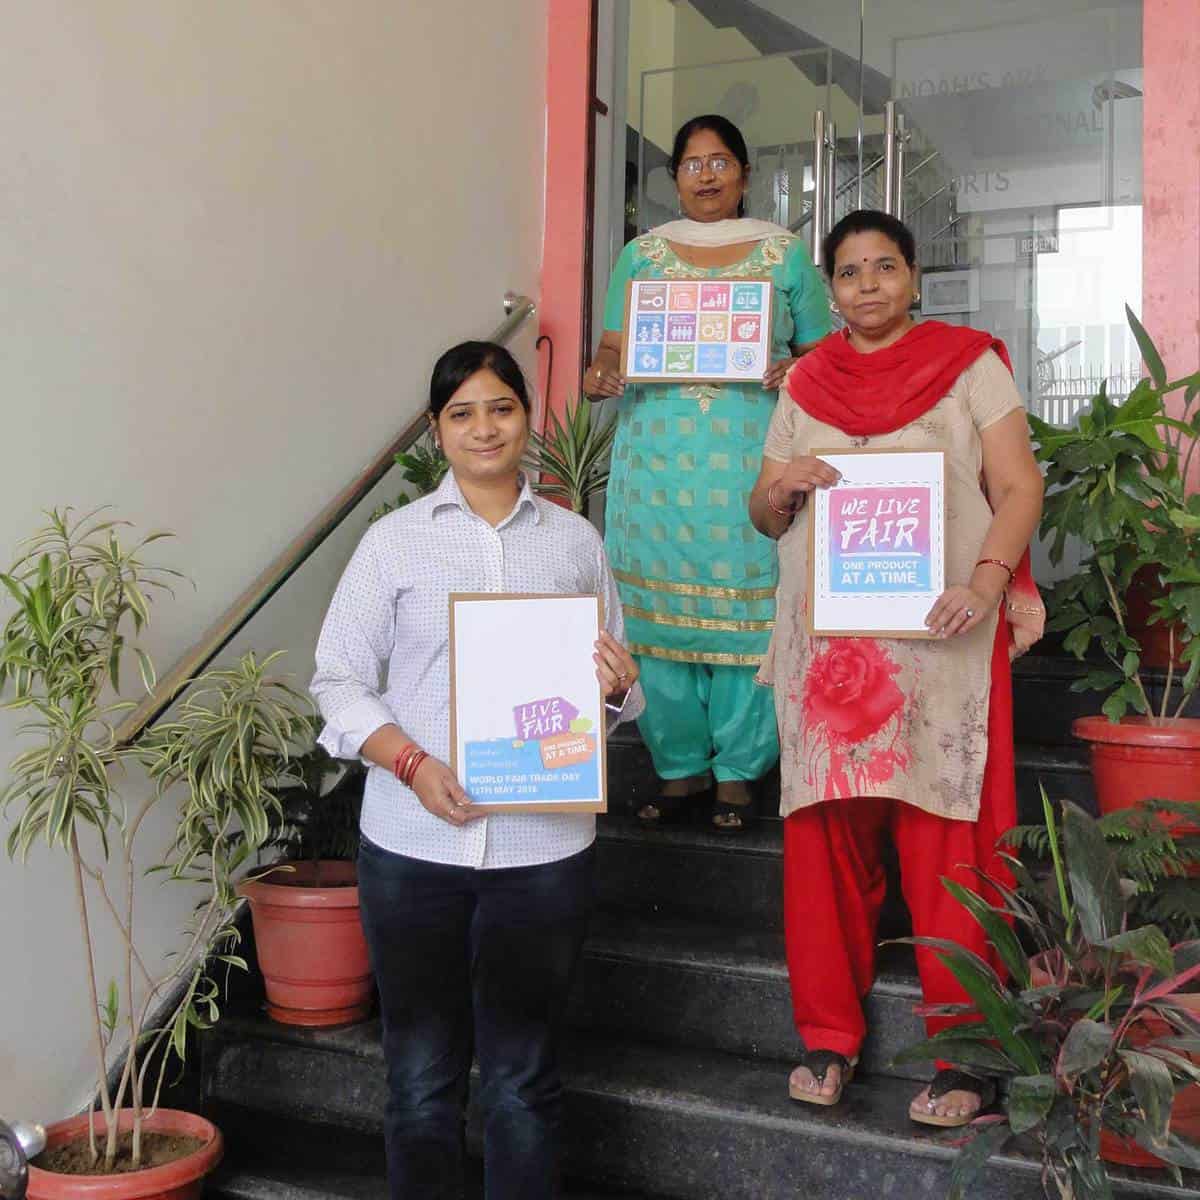 Three women promoting Fair Trade by standing on steps and holding signs.